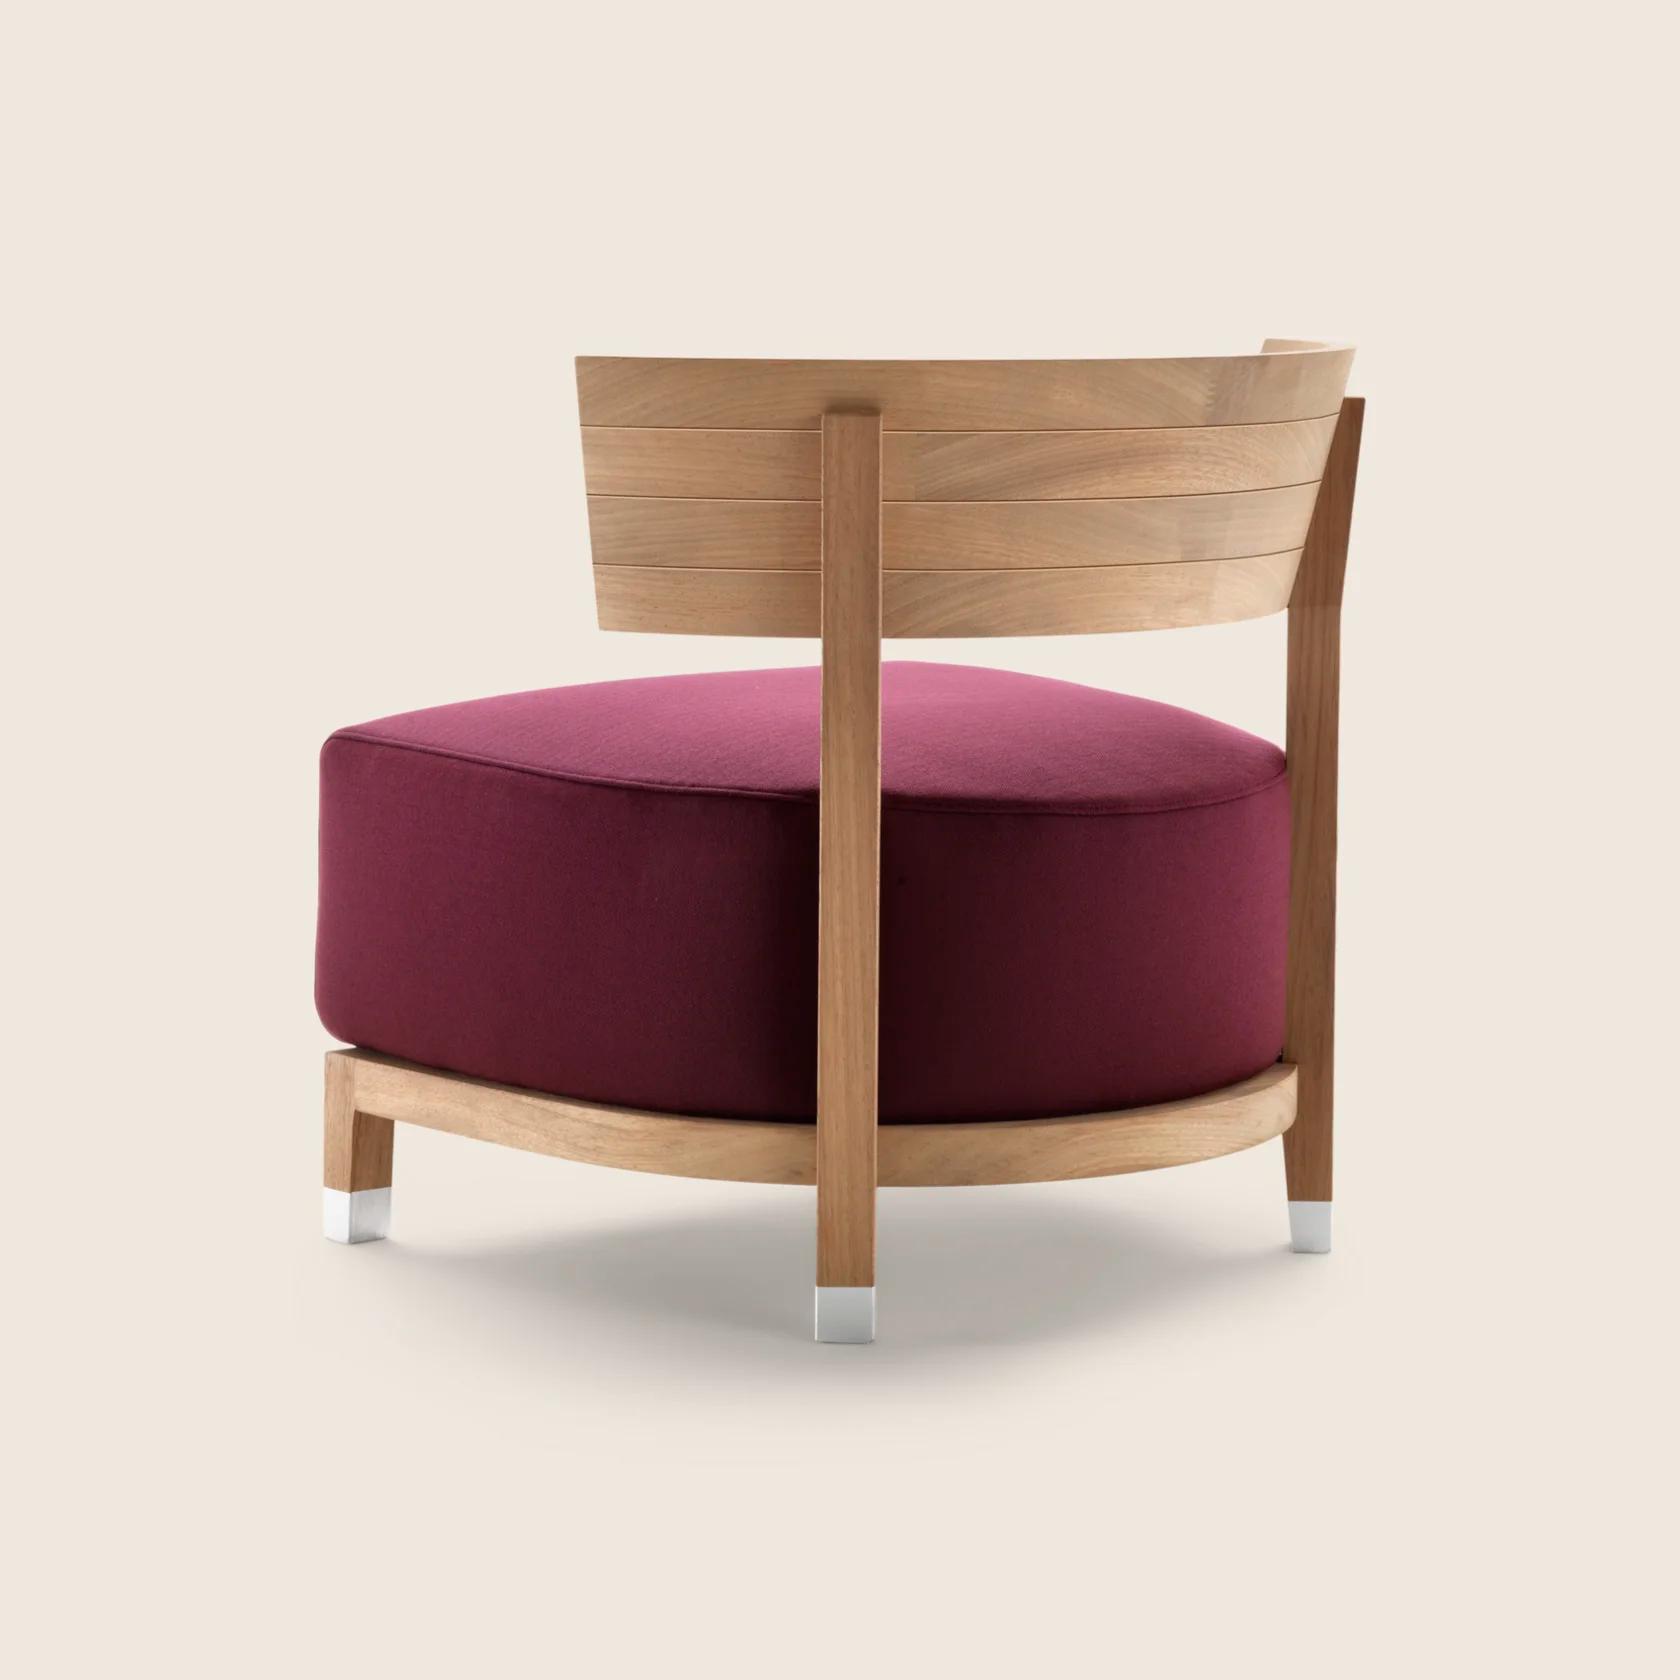 011NA1_THOMAS OUTDOOR_ARMCHAIR_03.png